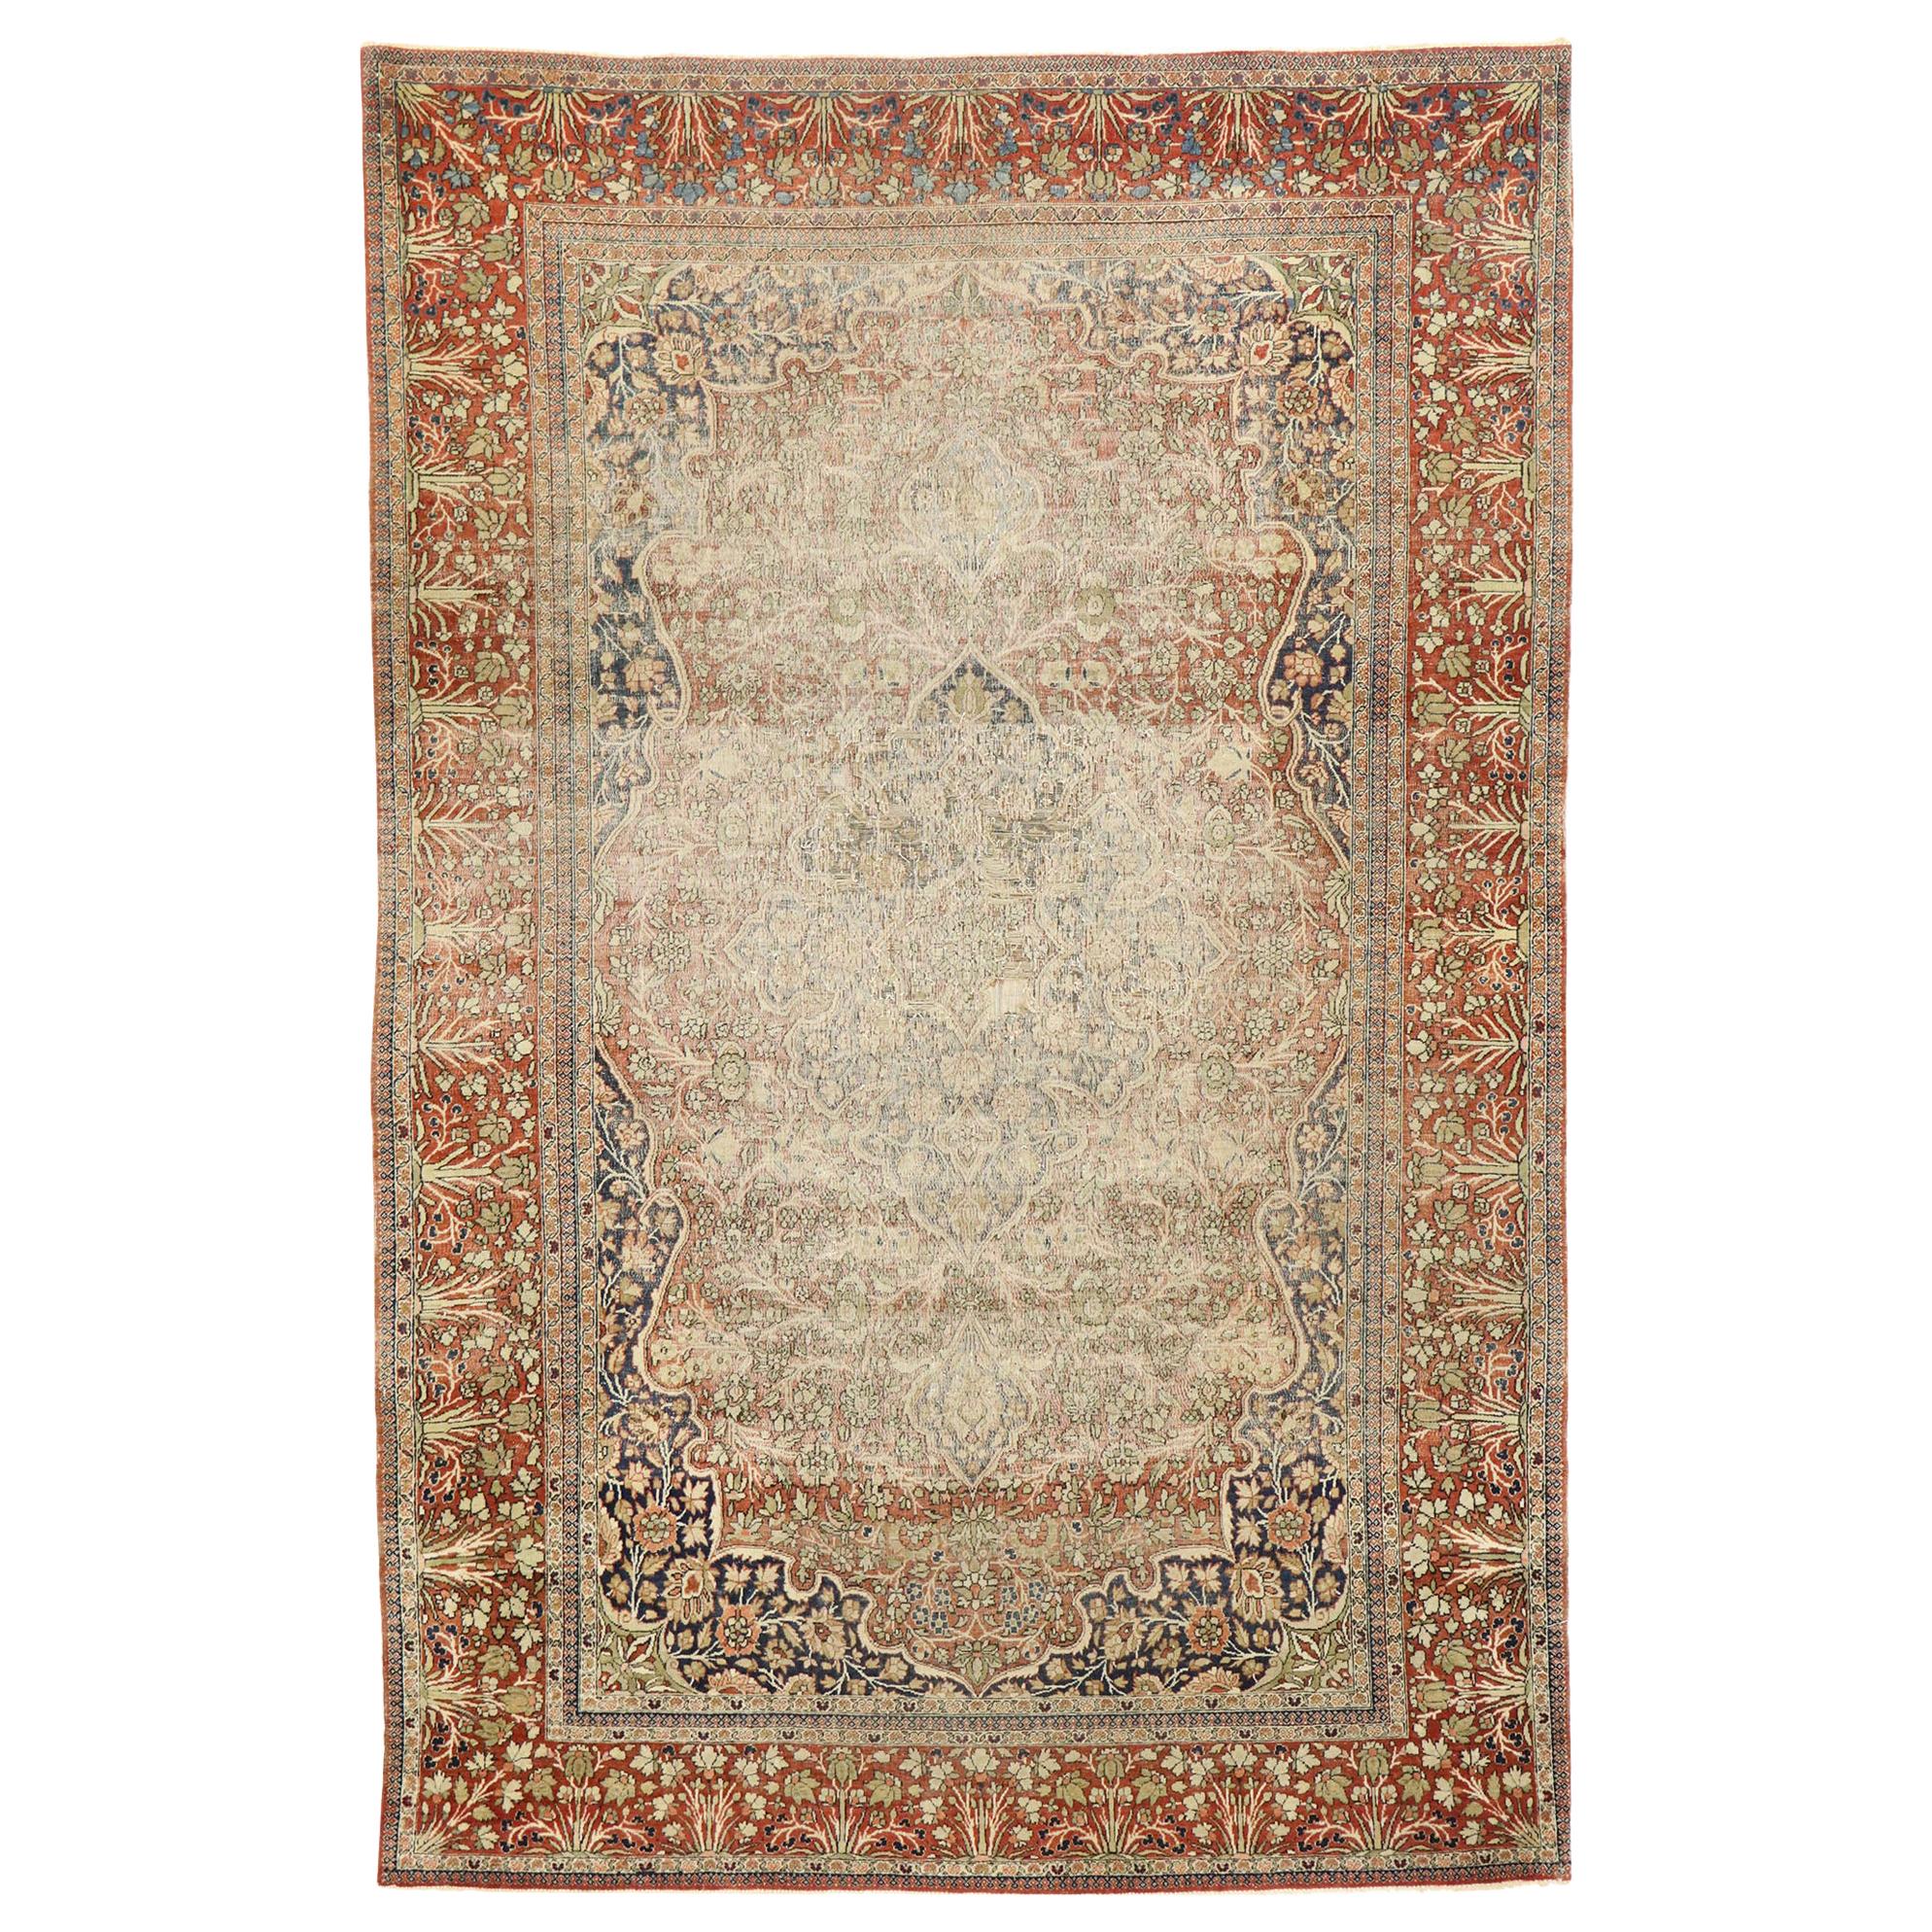 Distressed Antique Persian Mohtesham Kashan Rug with Modern Rustic English Style For Sale